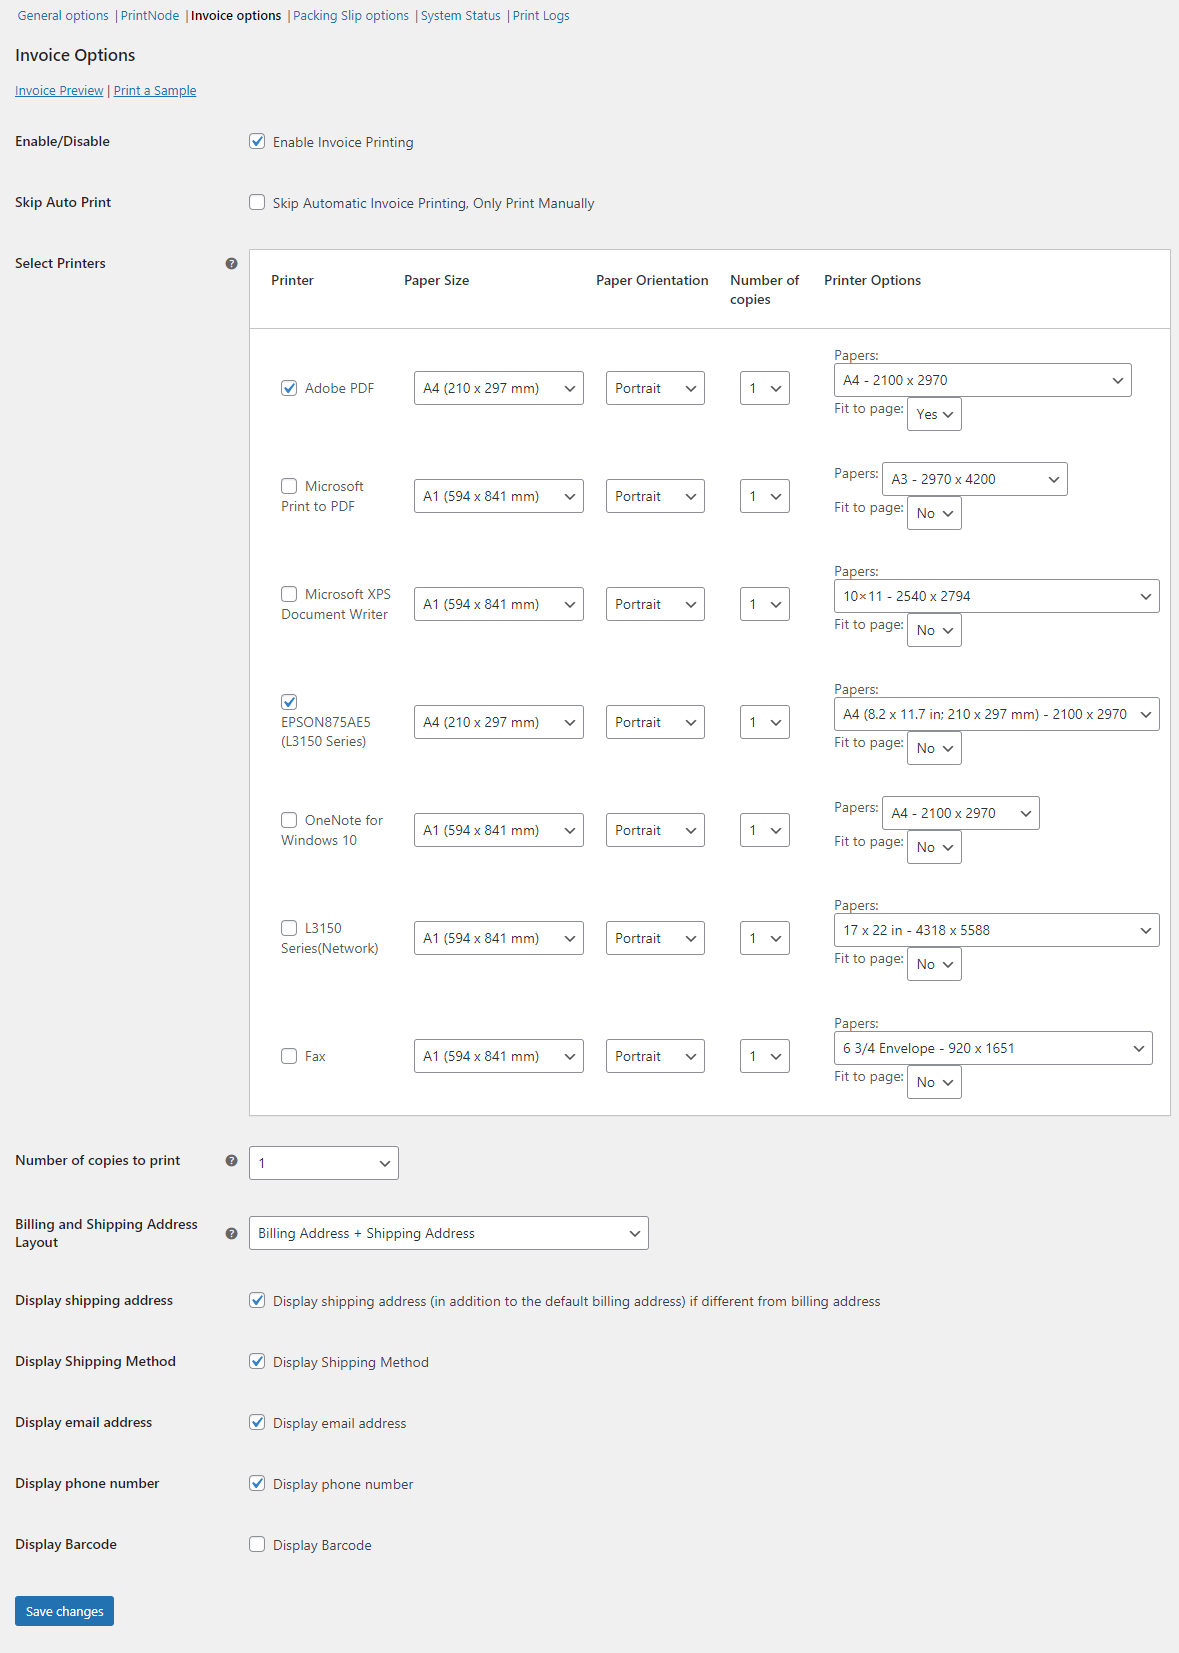 WooCommerce automatic order printing invoice options